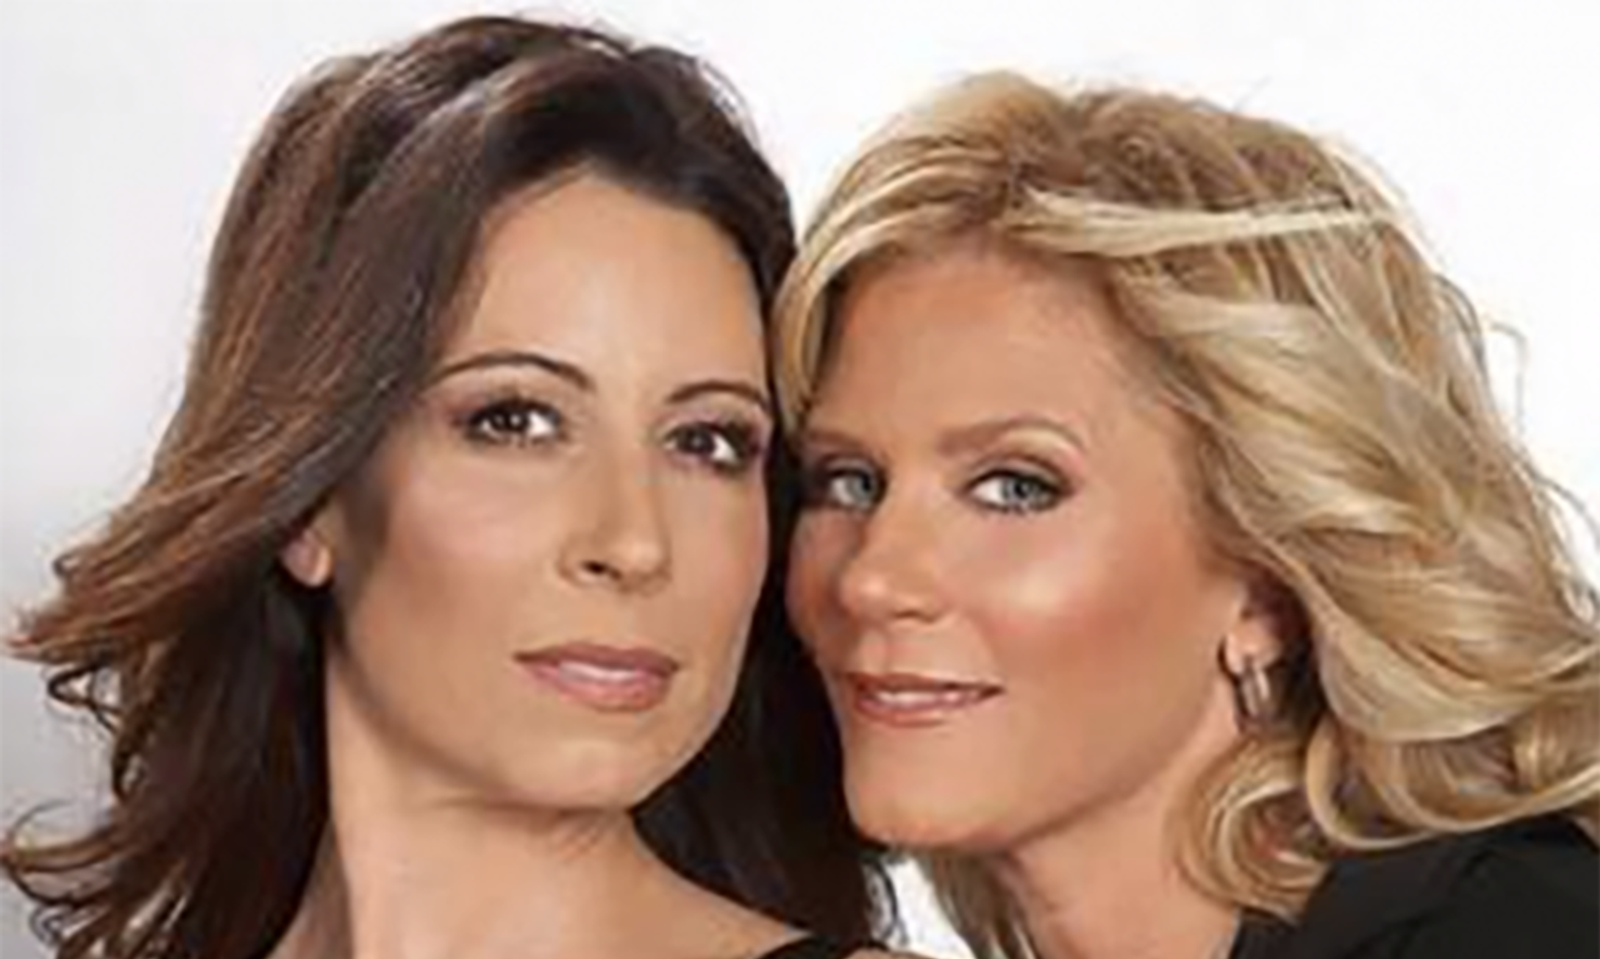 Christy Canyon & Ginger Lynn Allen Guest on 'Two Girls One Mic'